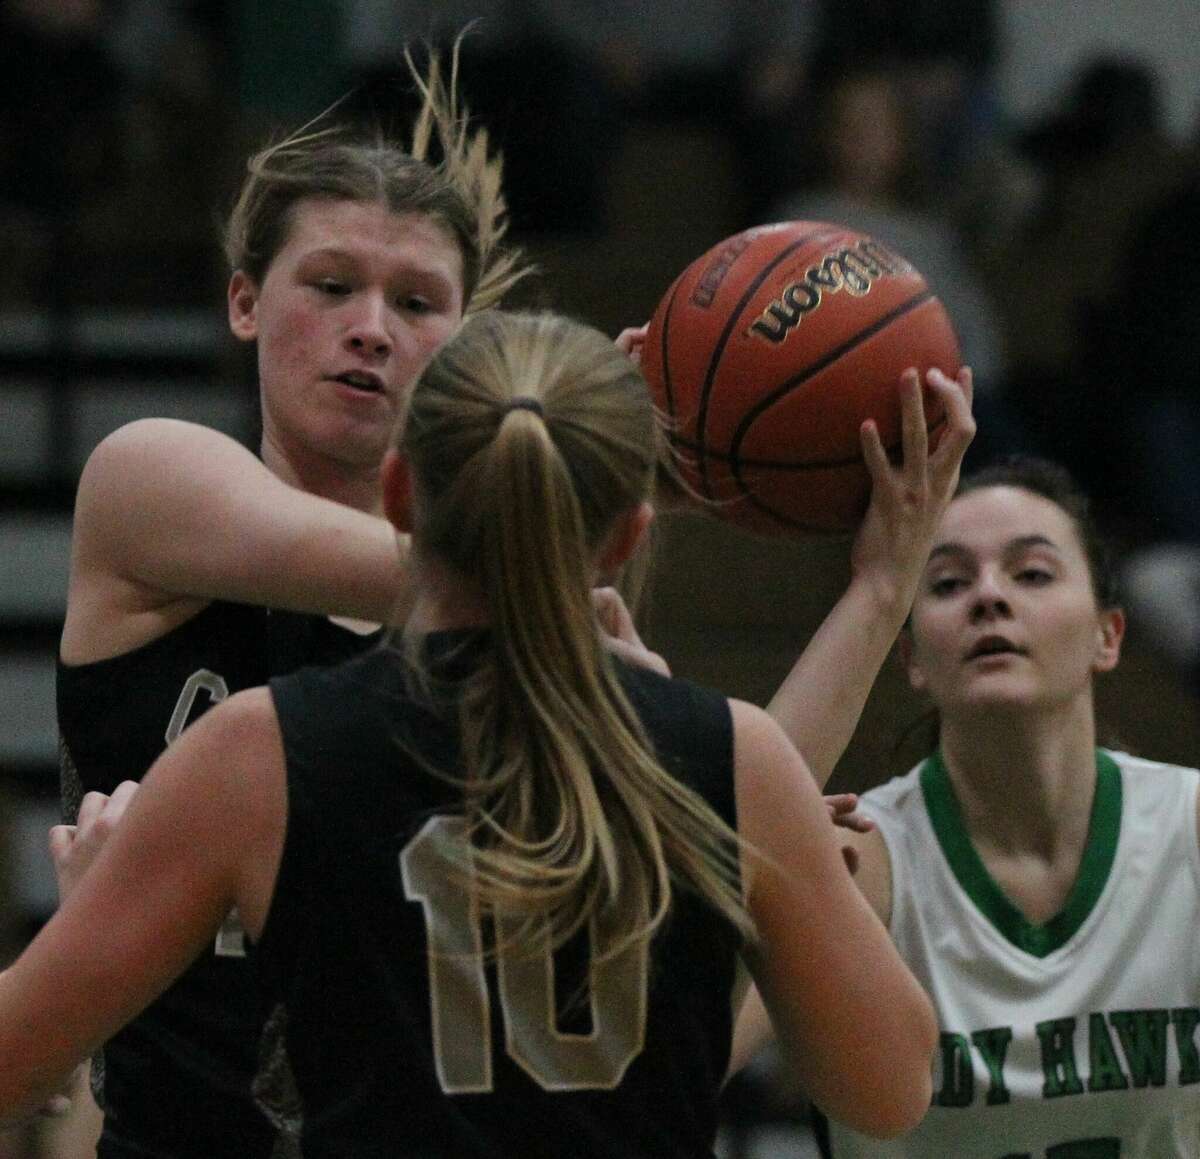 Action from the Carrollton girls' basketball team's win over West Central at Carrollton Monday night